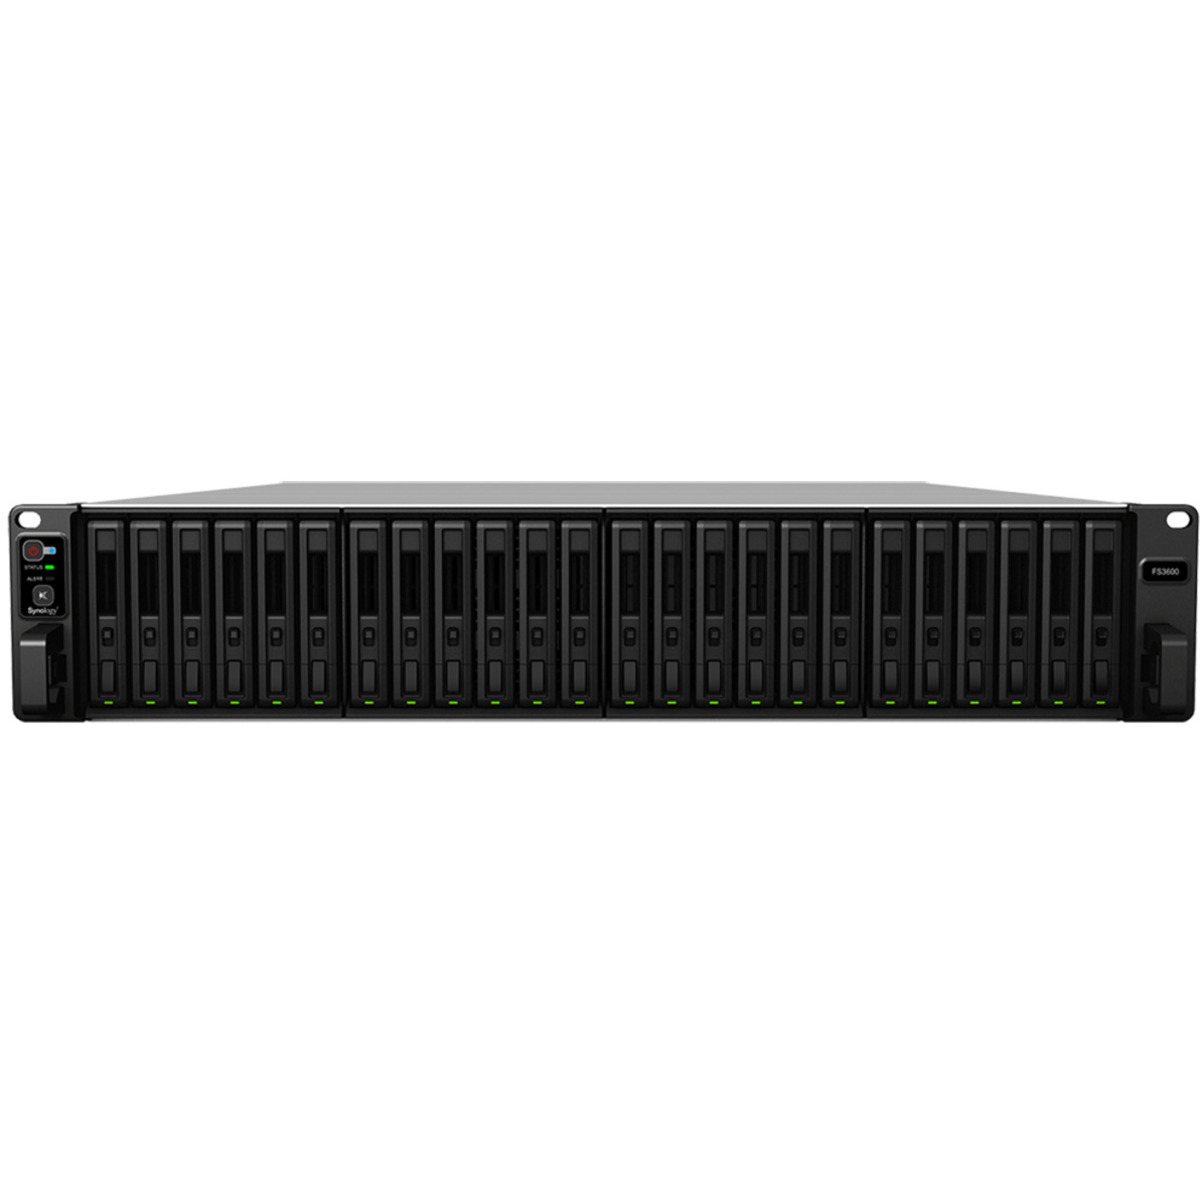 Synology FlashStation FS3600 10.5tb 24-Bay RackMount Large Business / Enterprise NAS - Network Attached Storage Device 21x500gb Western Digital Red SA500 WDS500G1R0A 2.5 560/530MB/s SATA 6Gb/s SSD NAS Class Drives Installed - Burn-In Tested - FREE RAM UPGRADE FlashStation FS3600